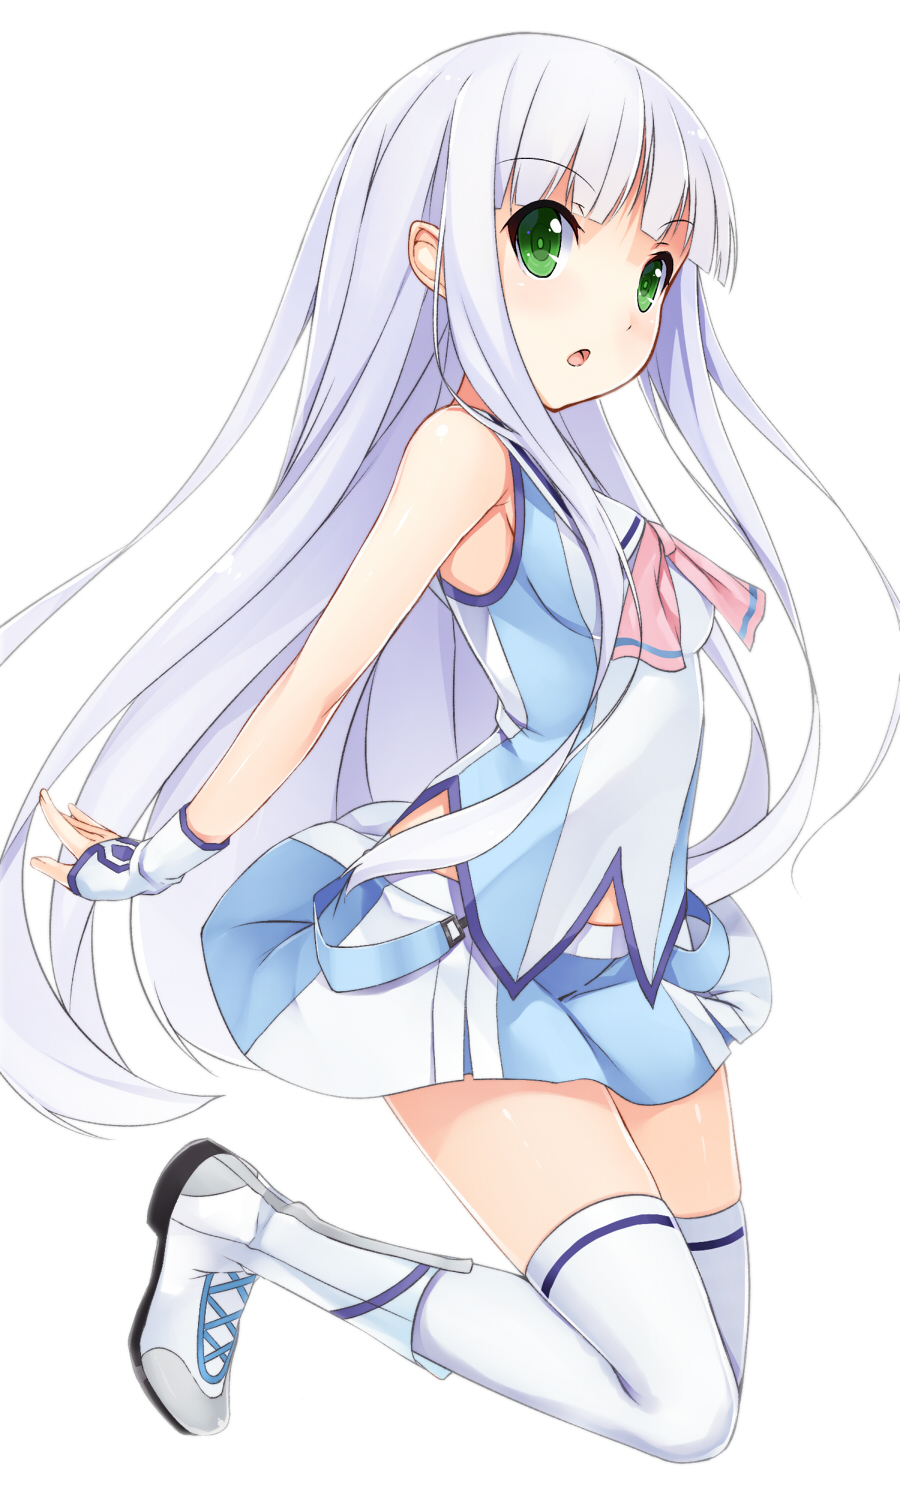 1girl aoki_hagane_no_arpeggio arpeggio_of_blue_steel blush boots fingerless_gloves gloves green_eyes highres iona long_hair open_mouth silver_hair simple_background skirt sleeveless thigh-highs toki/ very_long_hair white_background white_legwear